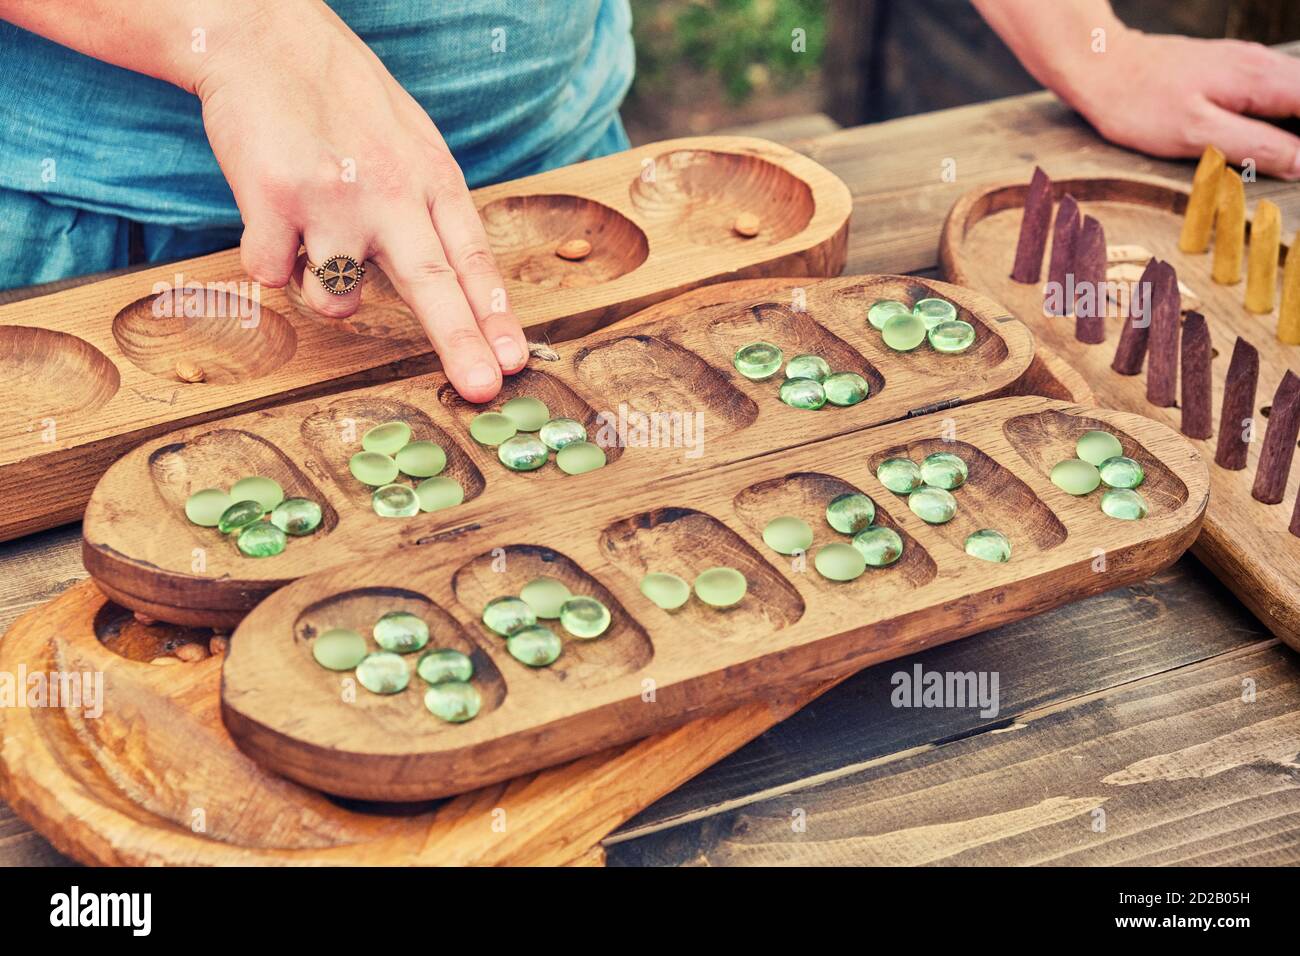 Vari (Ovare) is a board logic game for two from the family of mancala games. People play an ancient board game of the Mancala, Kalah. Stock Photo